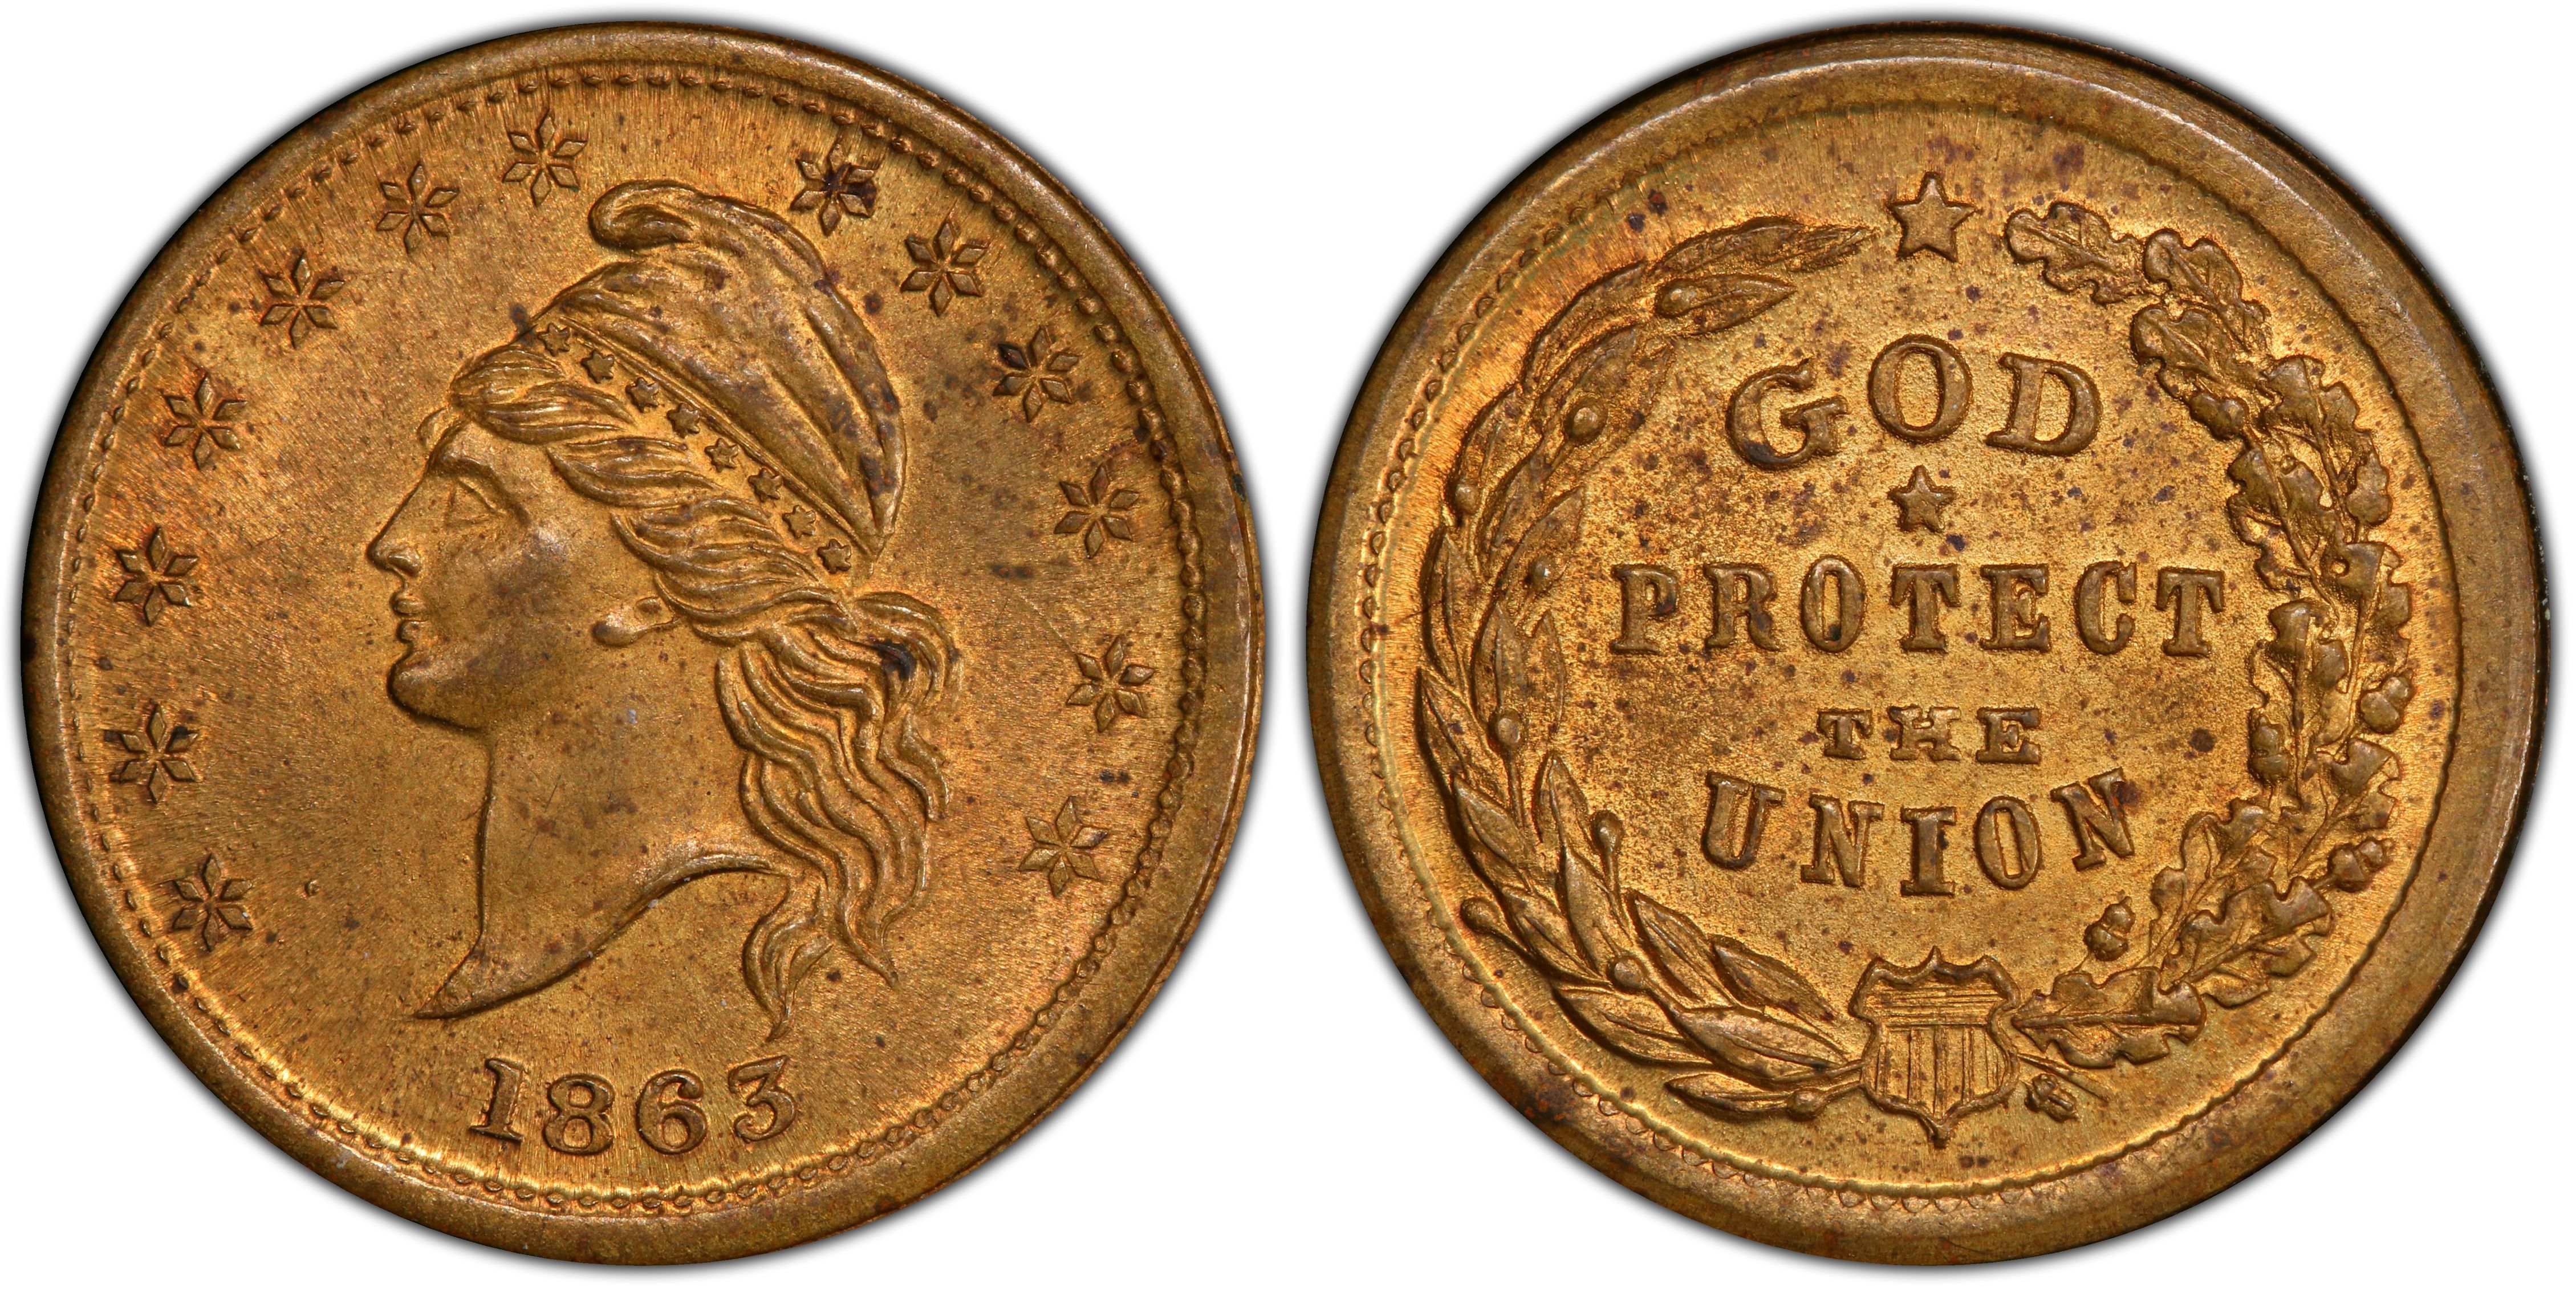 1863 Token F-5/288b Brass God Protect The Union Patriotic (Regular Strike)  Civil War Tokens - PCGS CoinFacts